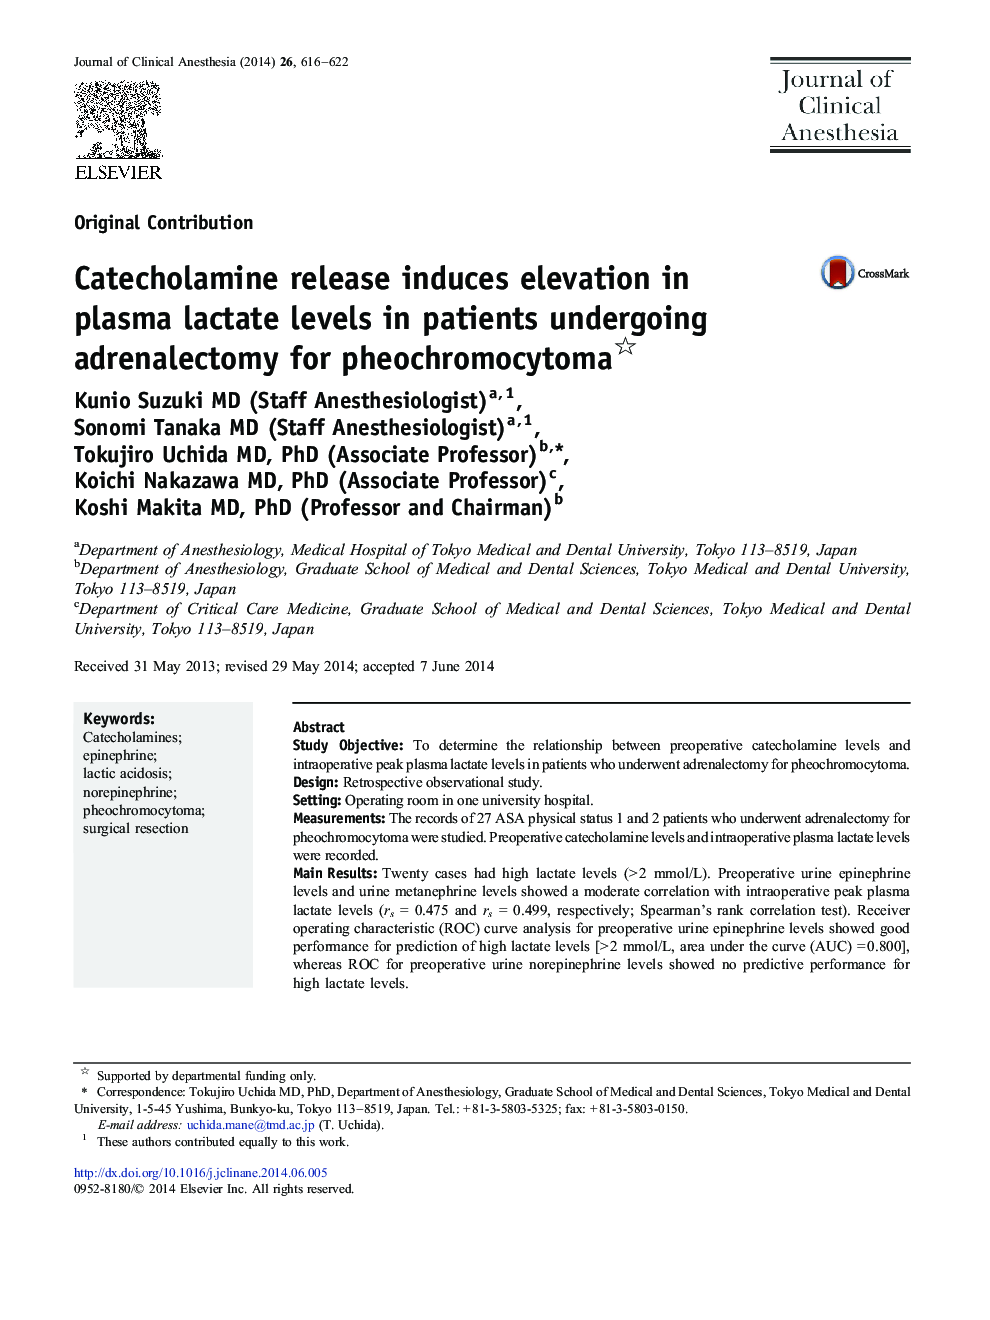 Catecholamine release induces elevation in plasma lactate levels in patients undergoing adrenalectomy for pheochromocytoma 